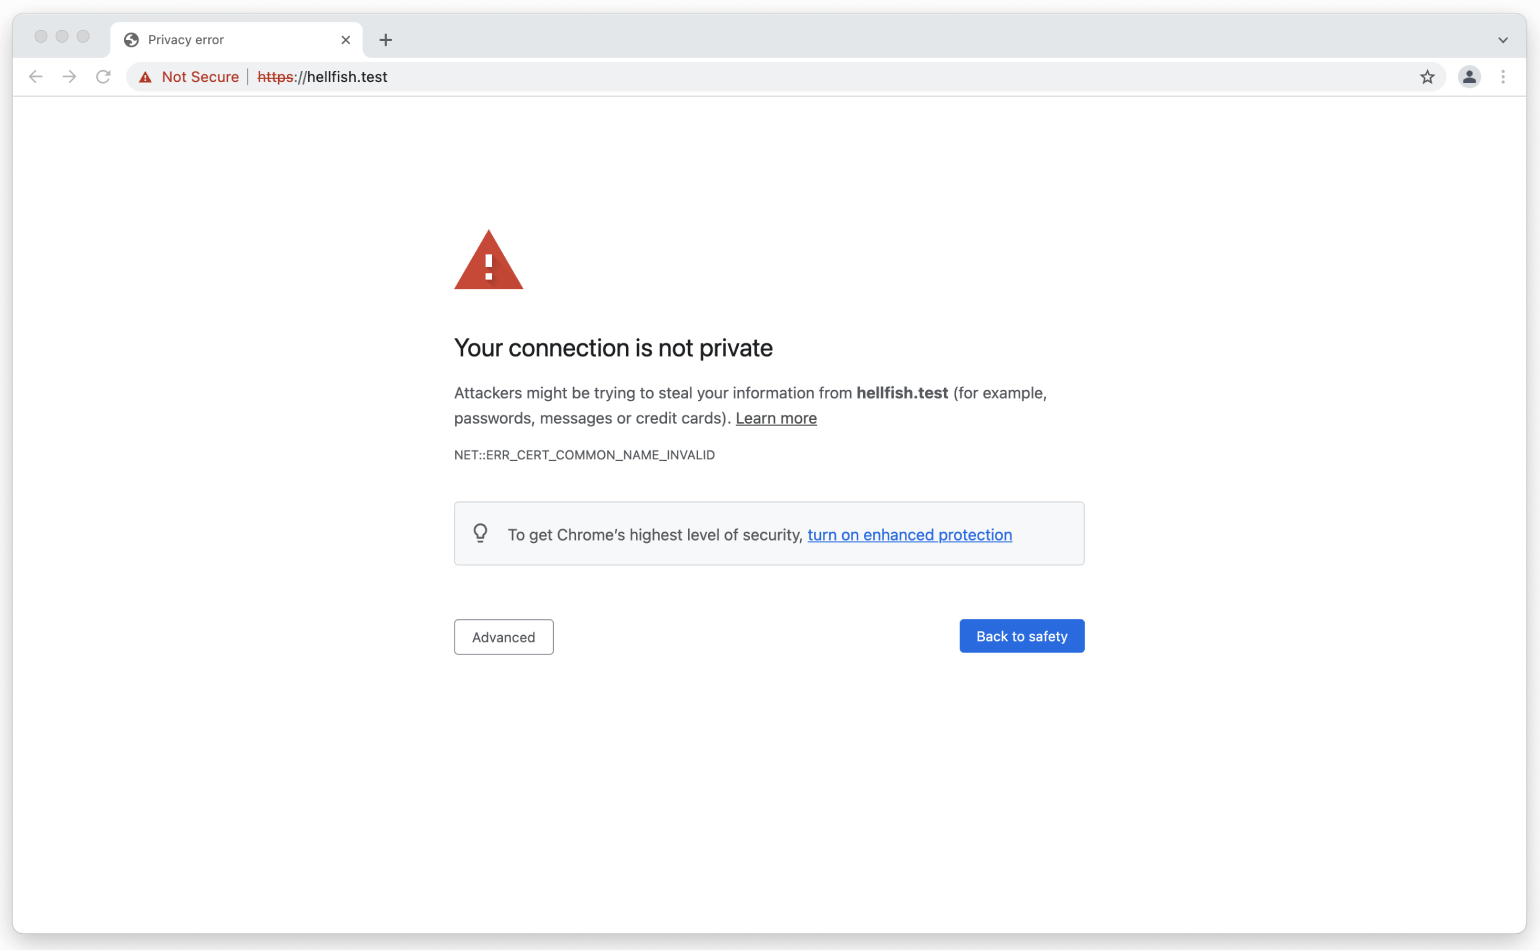 Screenshot of Chrome browser with privacy error.